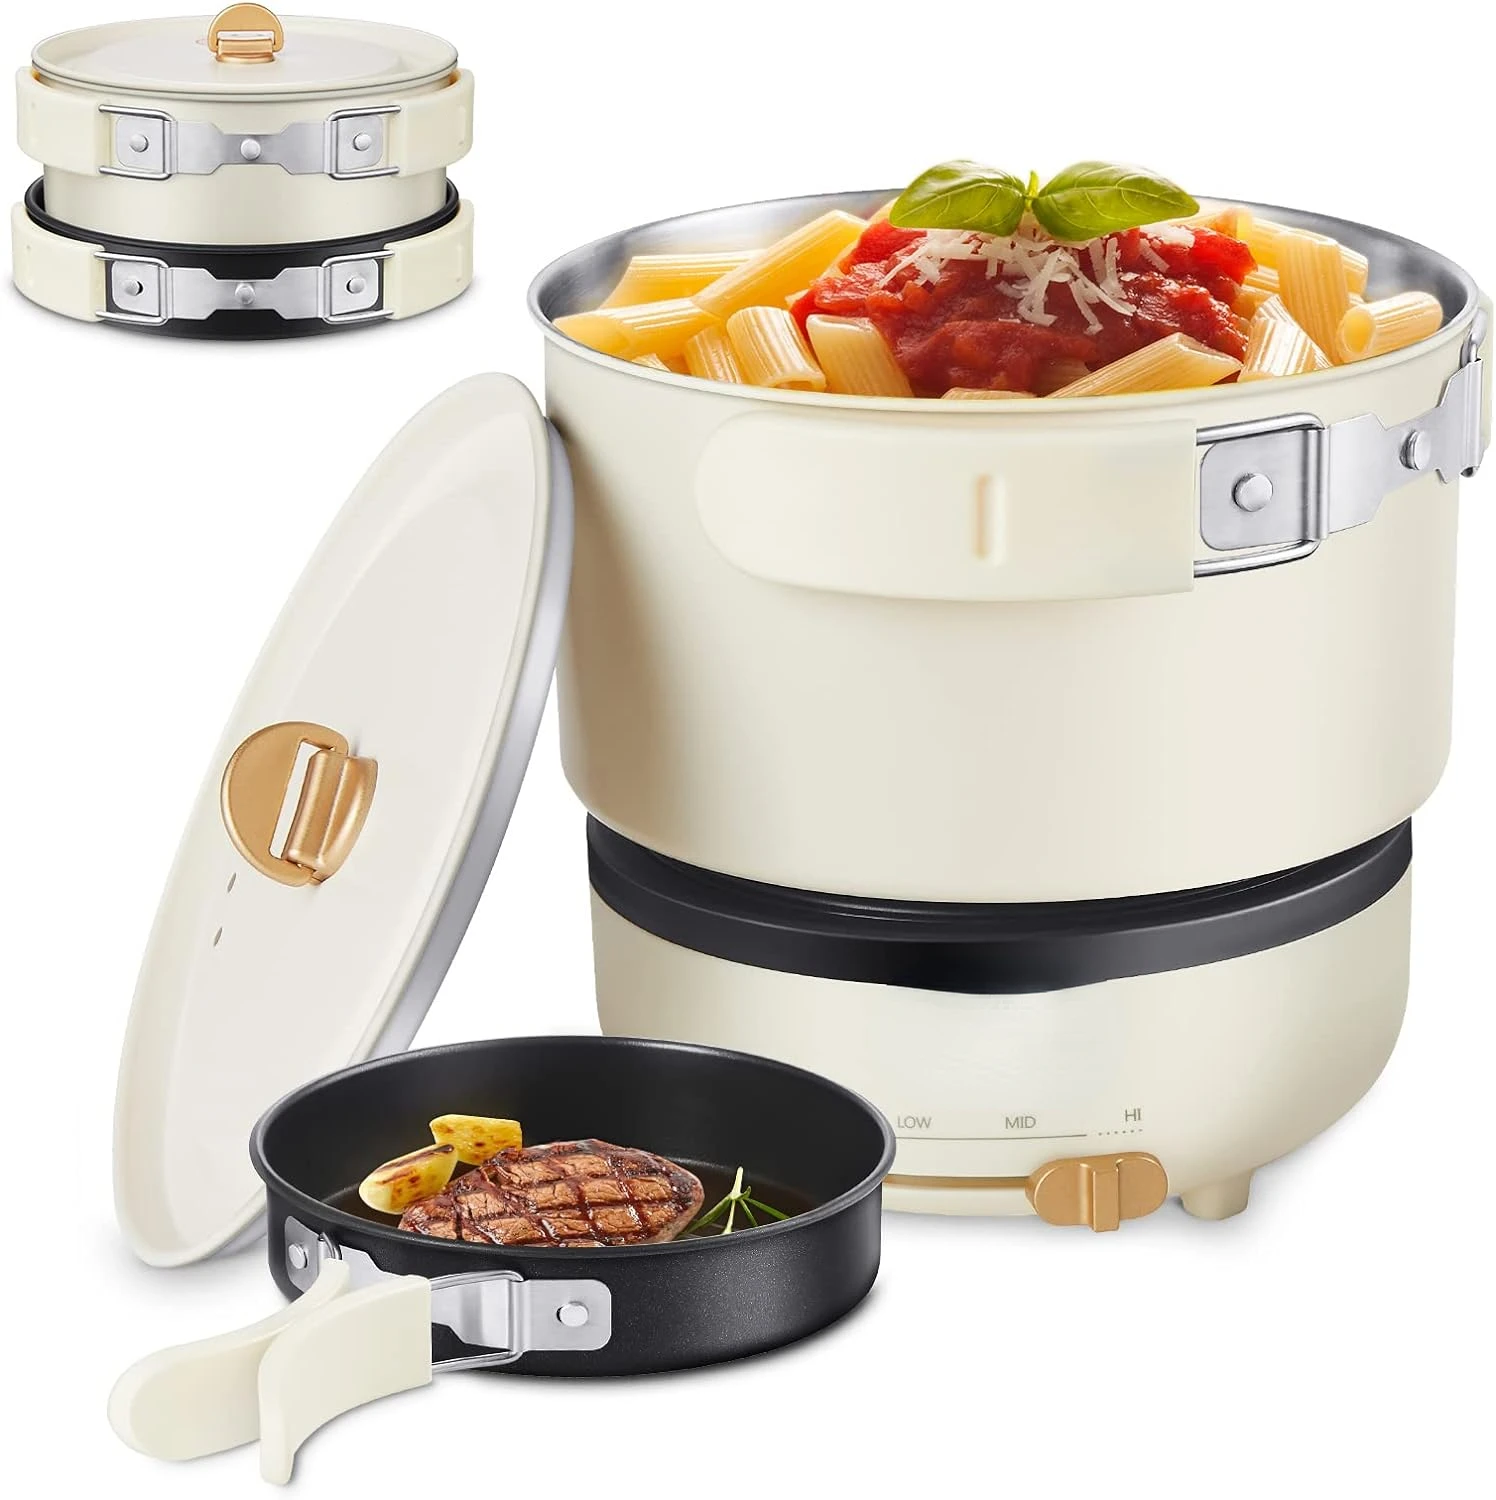 

with Foldable Handles, Non-stick Frying Pan, 1.2L Mini Hot Pot, Multi-Functional Ramen Noodle Cooker for Pasta, Oatmeal, Soup, S